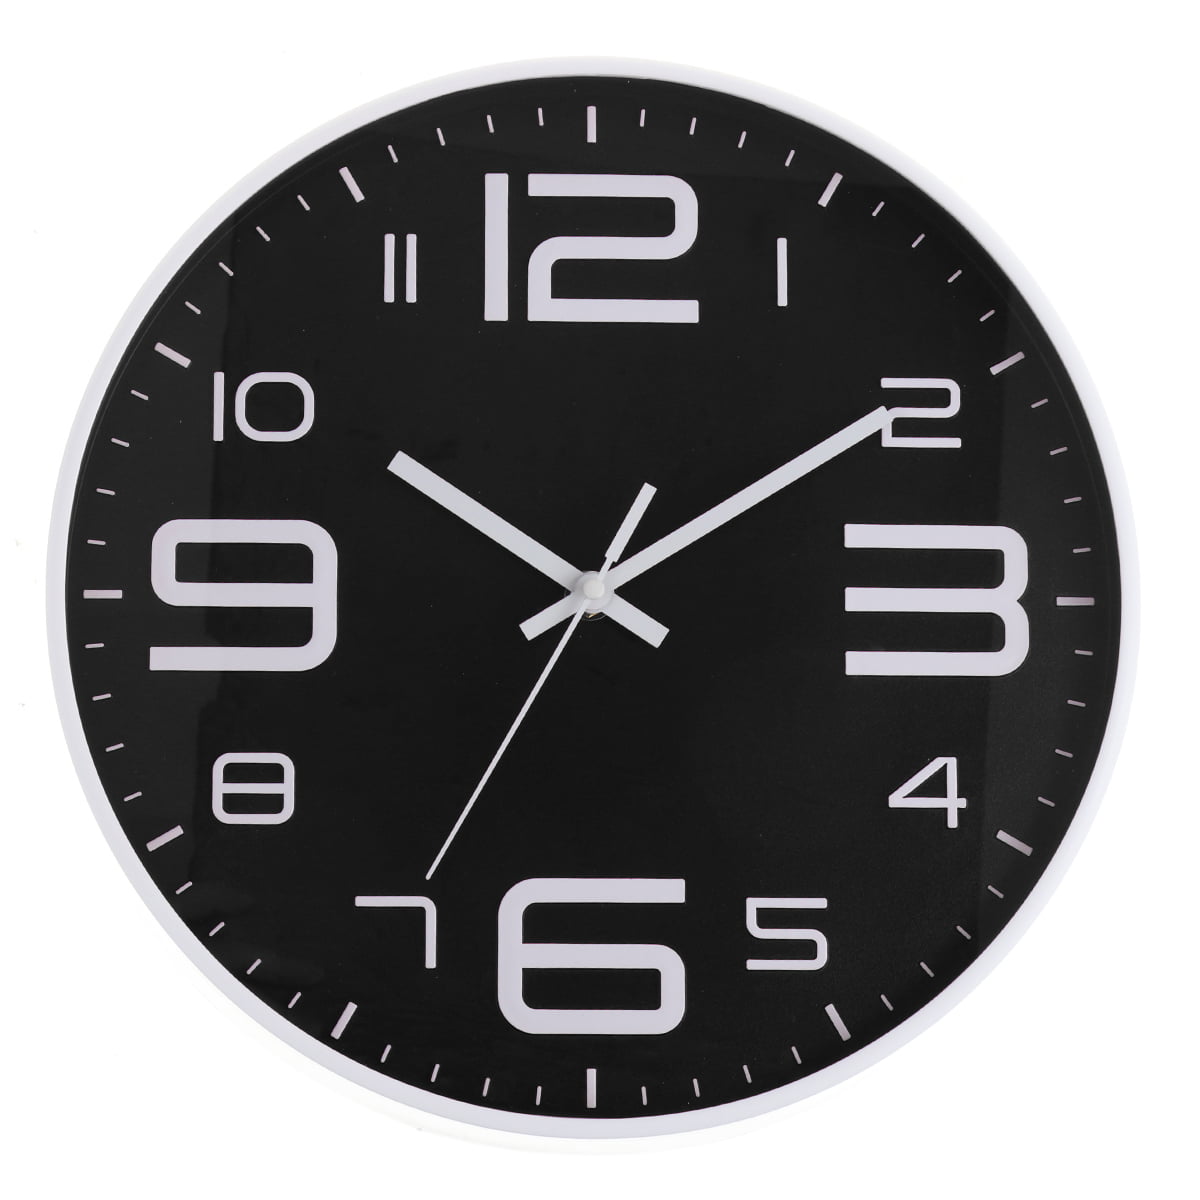 Wall Clock 12 Silent Non-Ticking Quartz Decorative Wall Clock 3D Large Number Modern Style Good for Living Room & Home & Office Battery Operate white